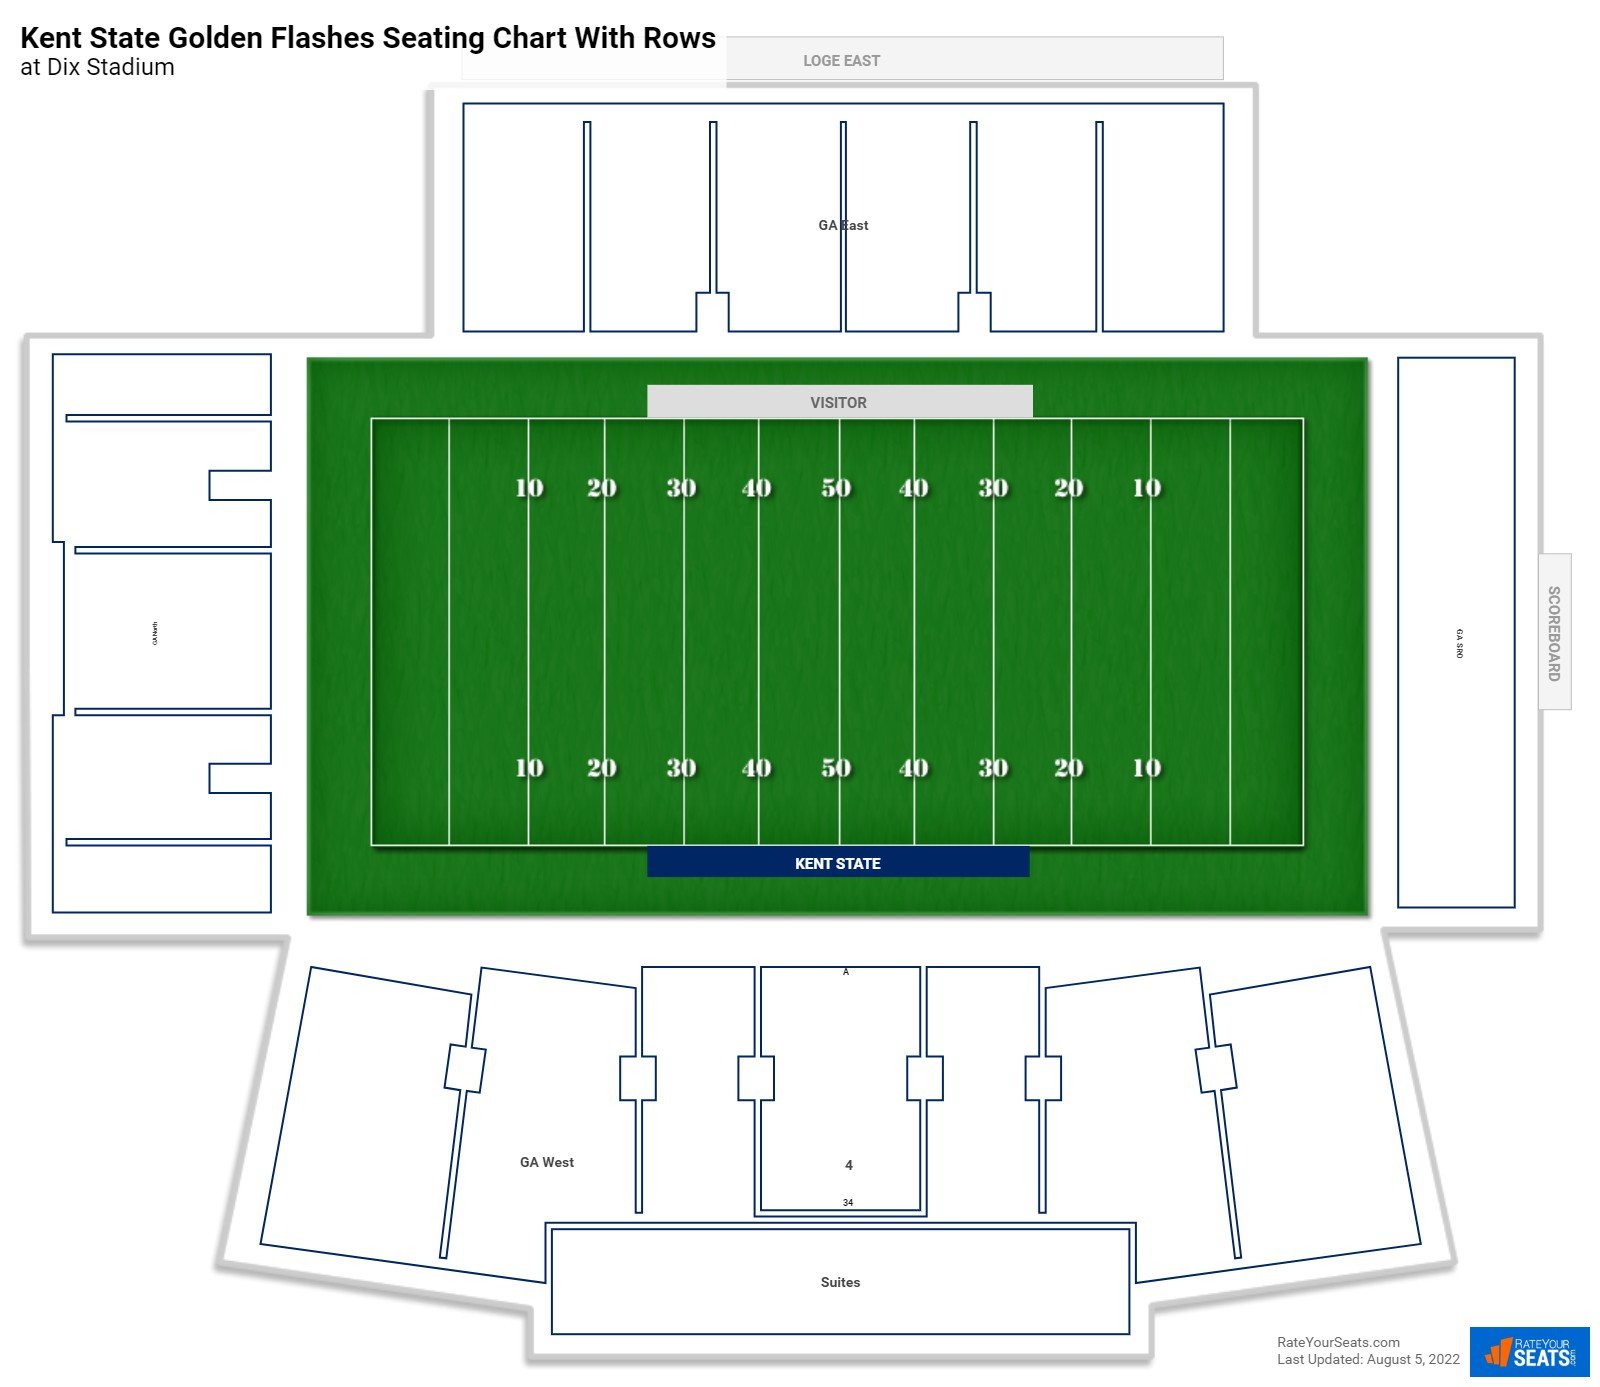 Dix Stadium seating chart with row numbers